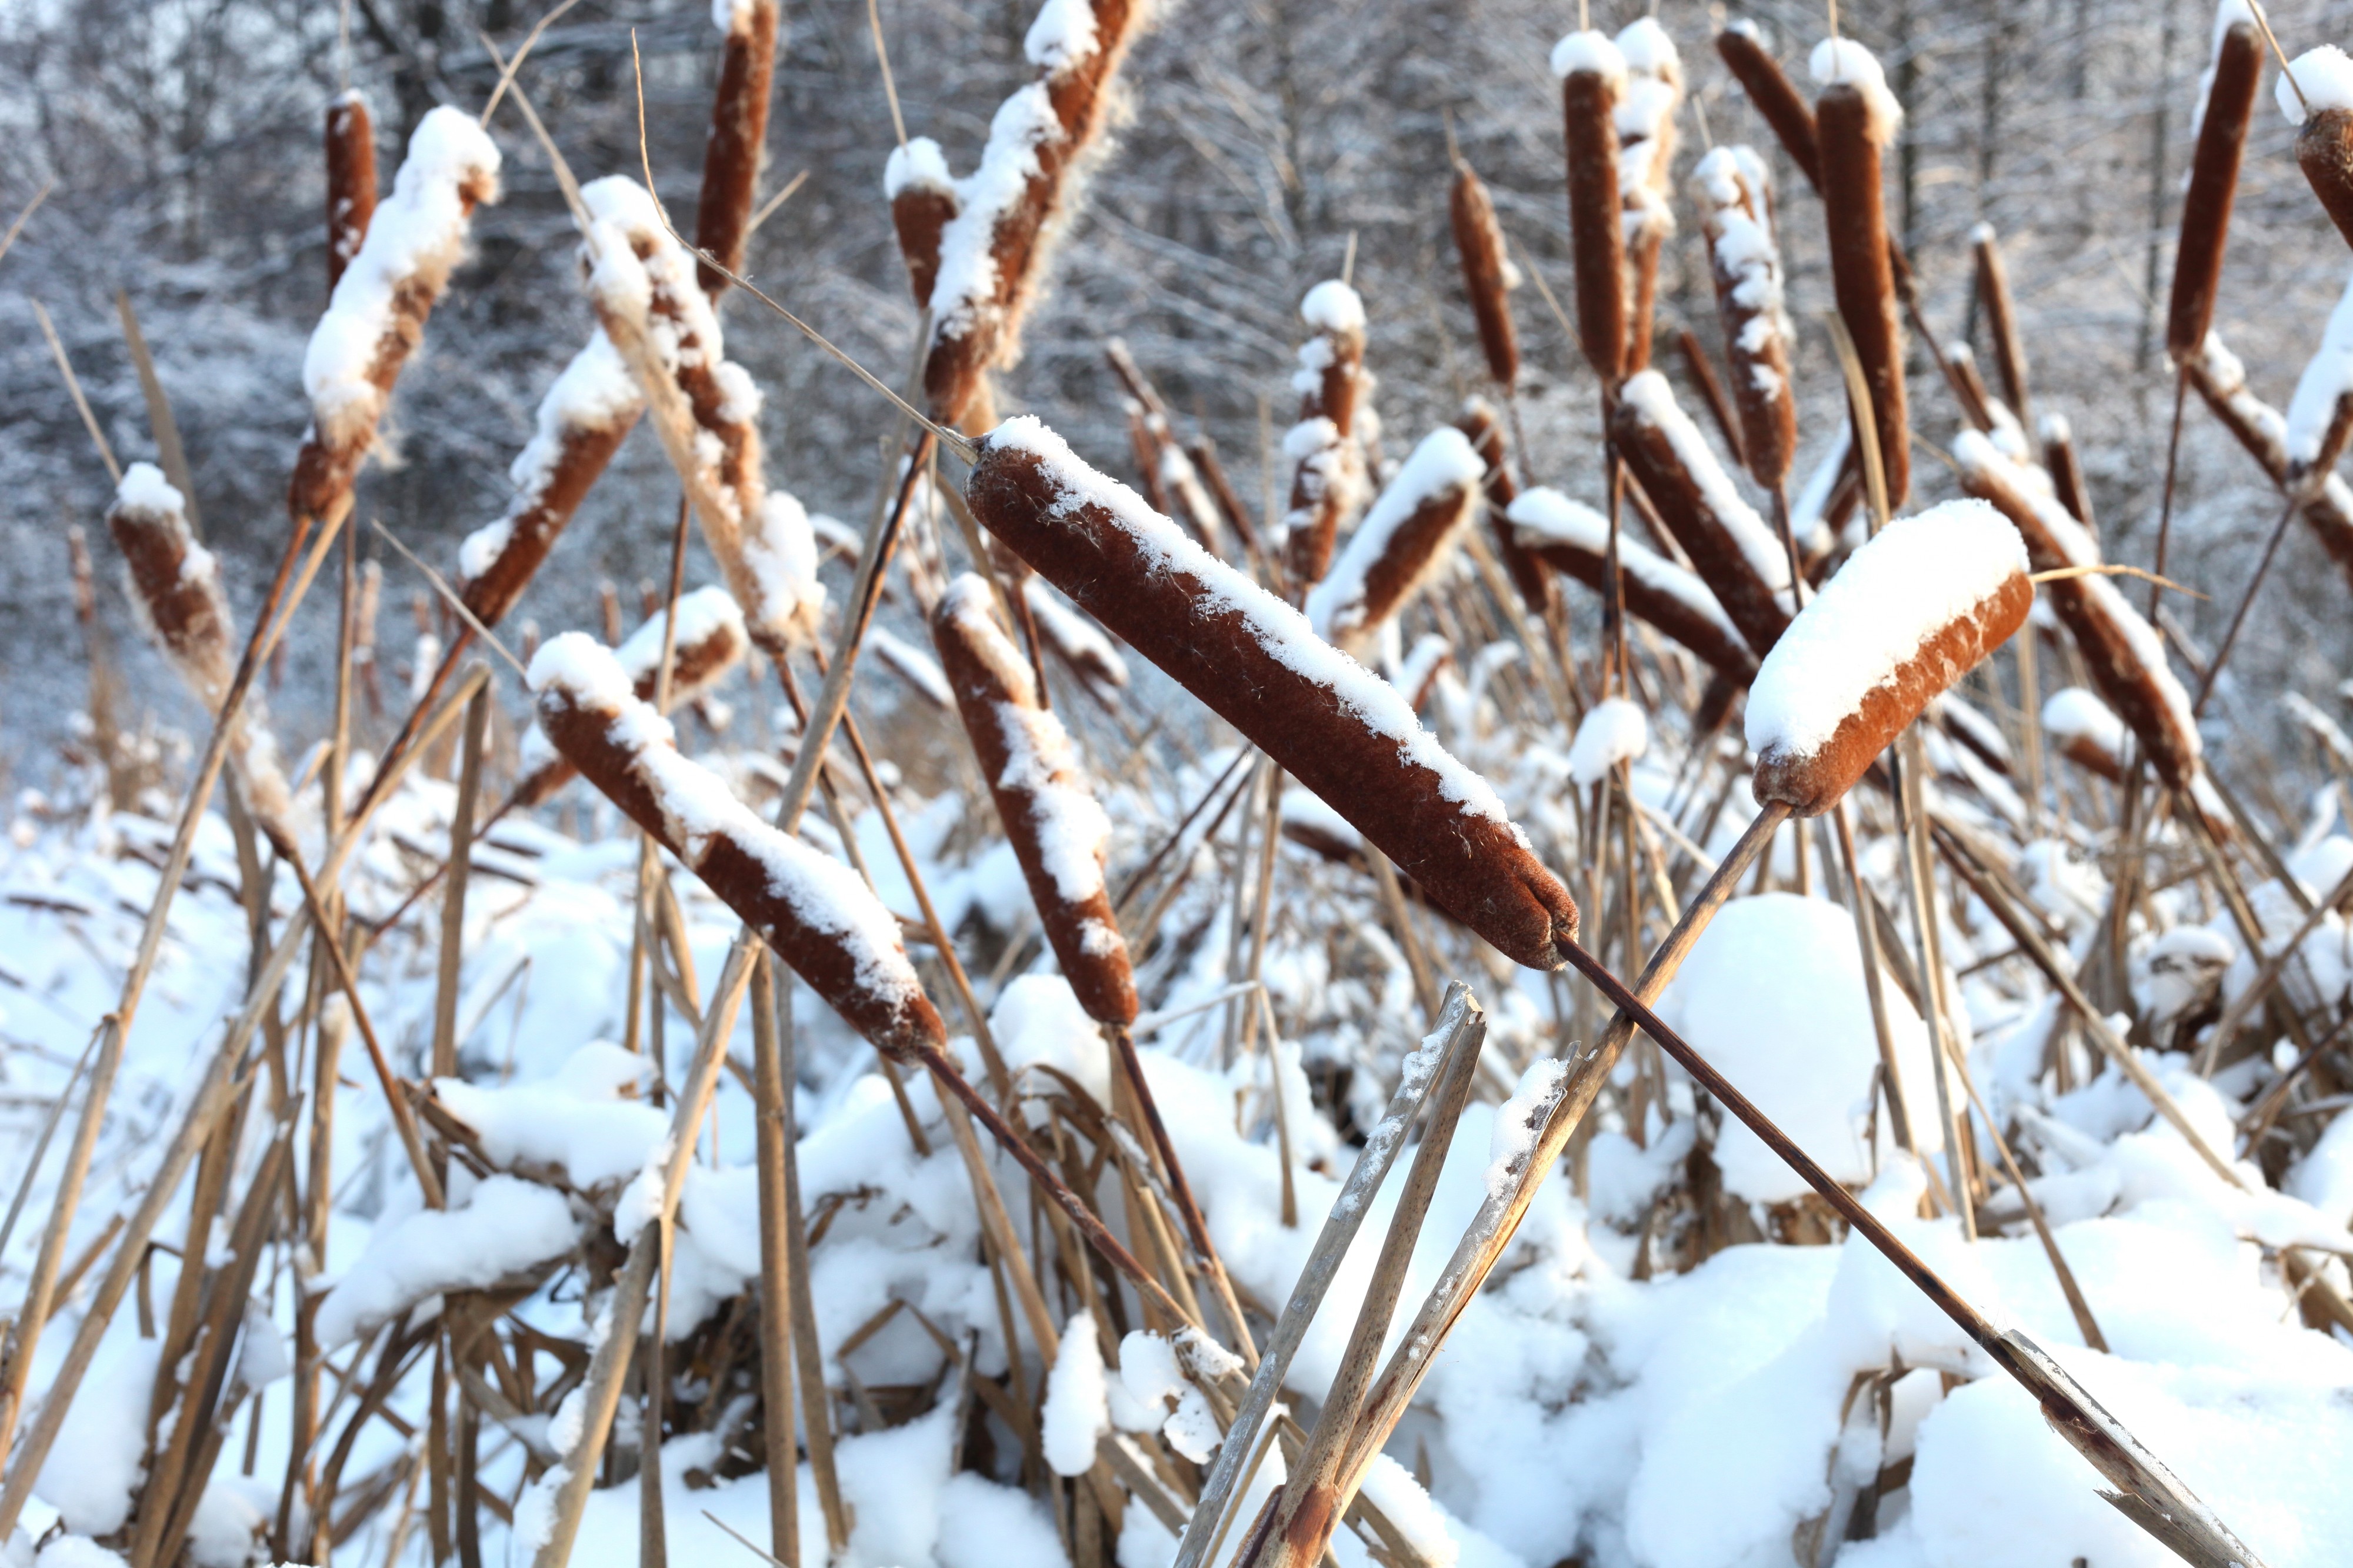 God's creation: reeds in snow, December 2012, photo 9